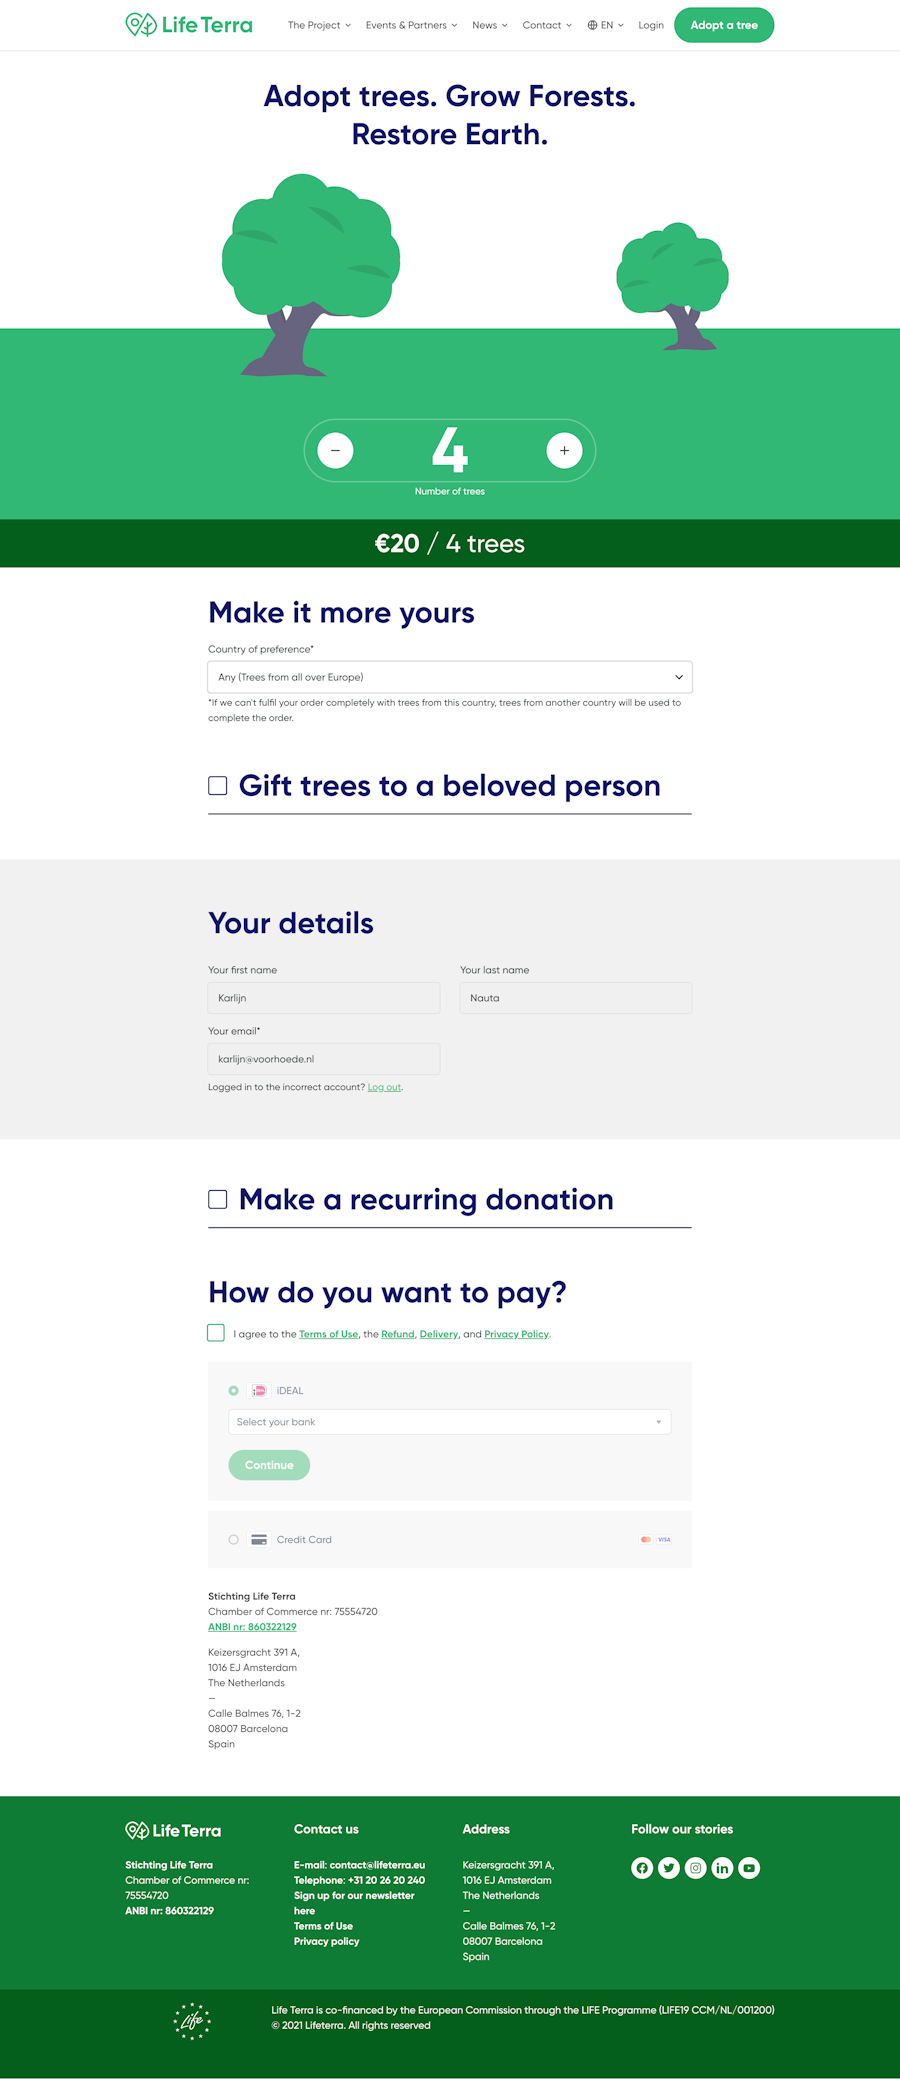 Screenshot of a webpage designed with green and white. On top there are images of trees. The page contains a form where you can adopt trees.